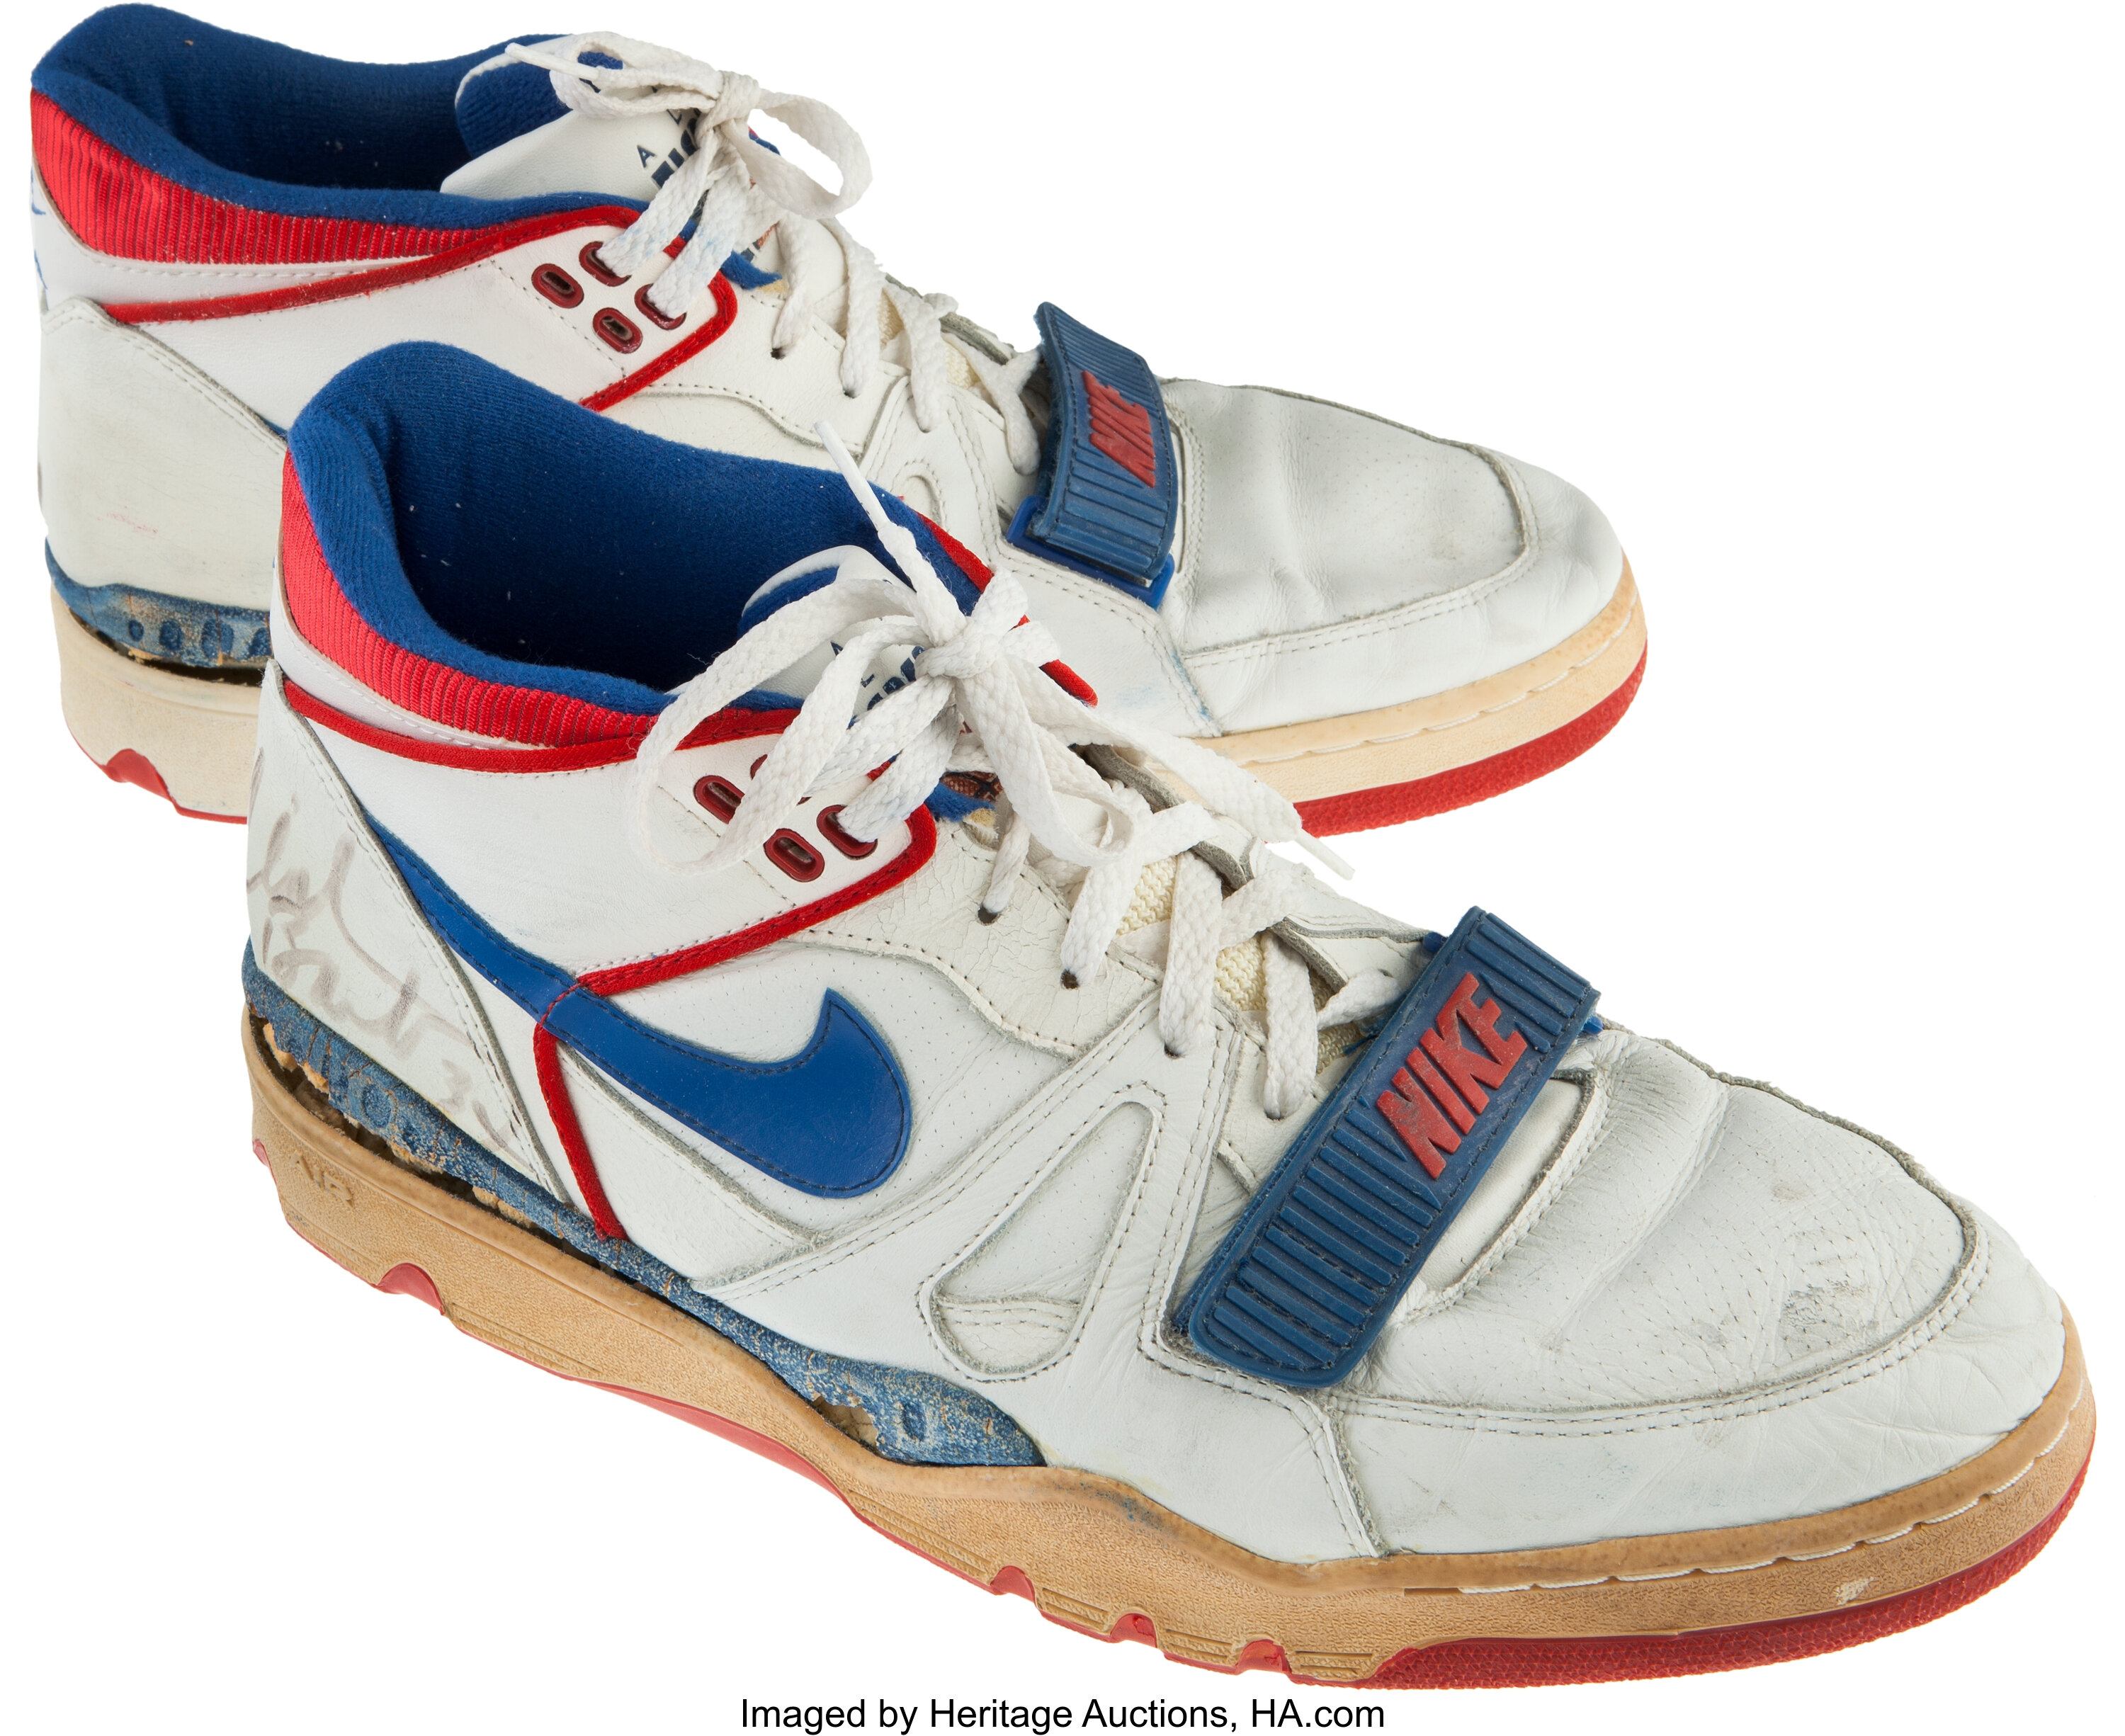 1988-89 Charles Barkley Game Worn Shoes - From Family of Sandy | Lot #80292  | Heritage Auctions